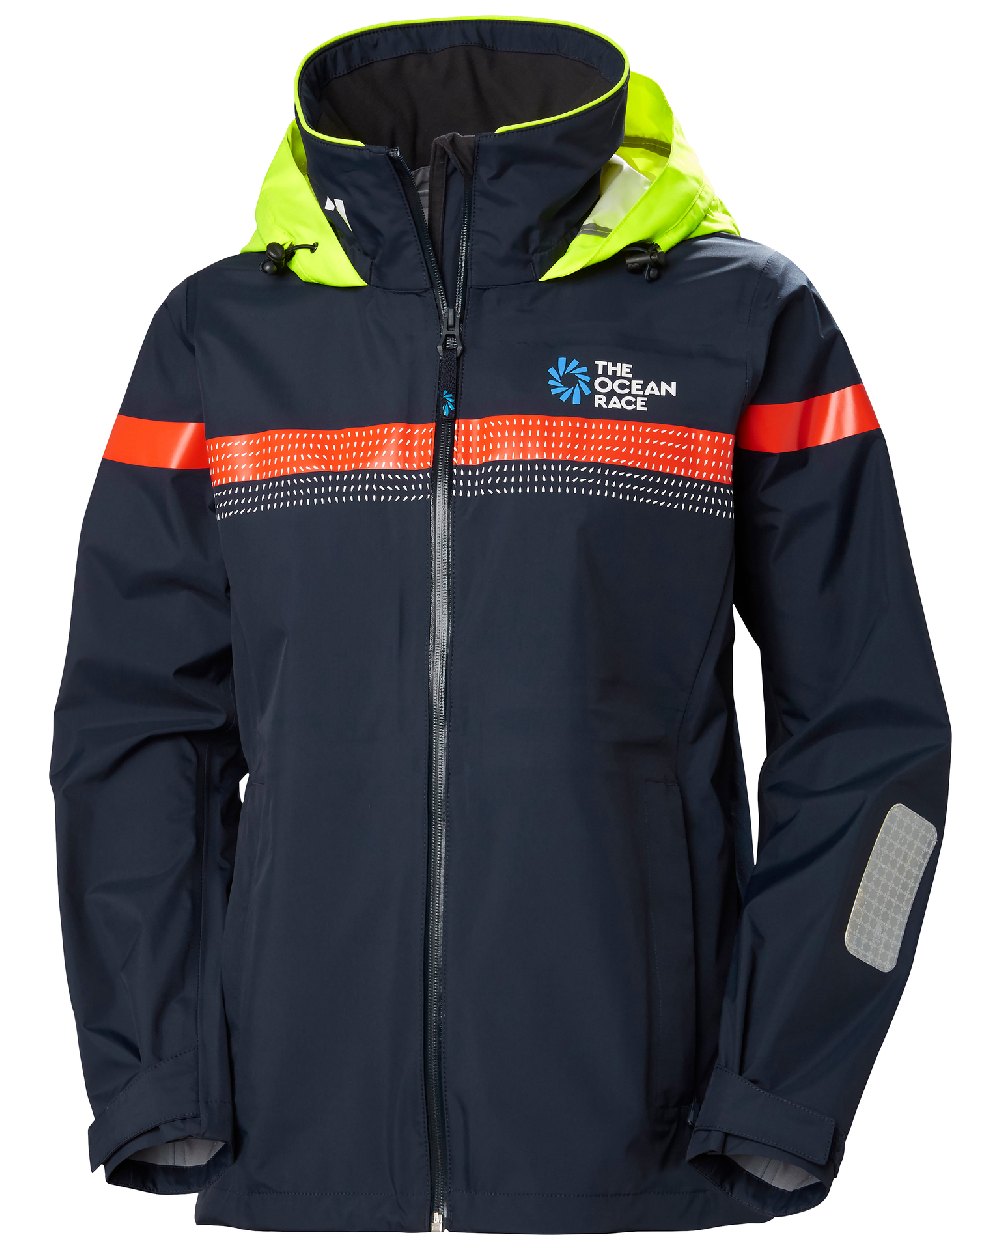 Navy coloured Helly Hansen Womens Ocean Race 3 Layer Sailing Shell Jacket on white background 